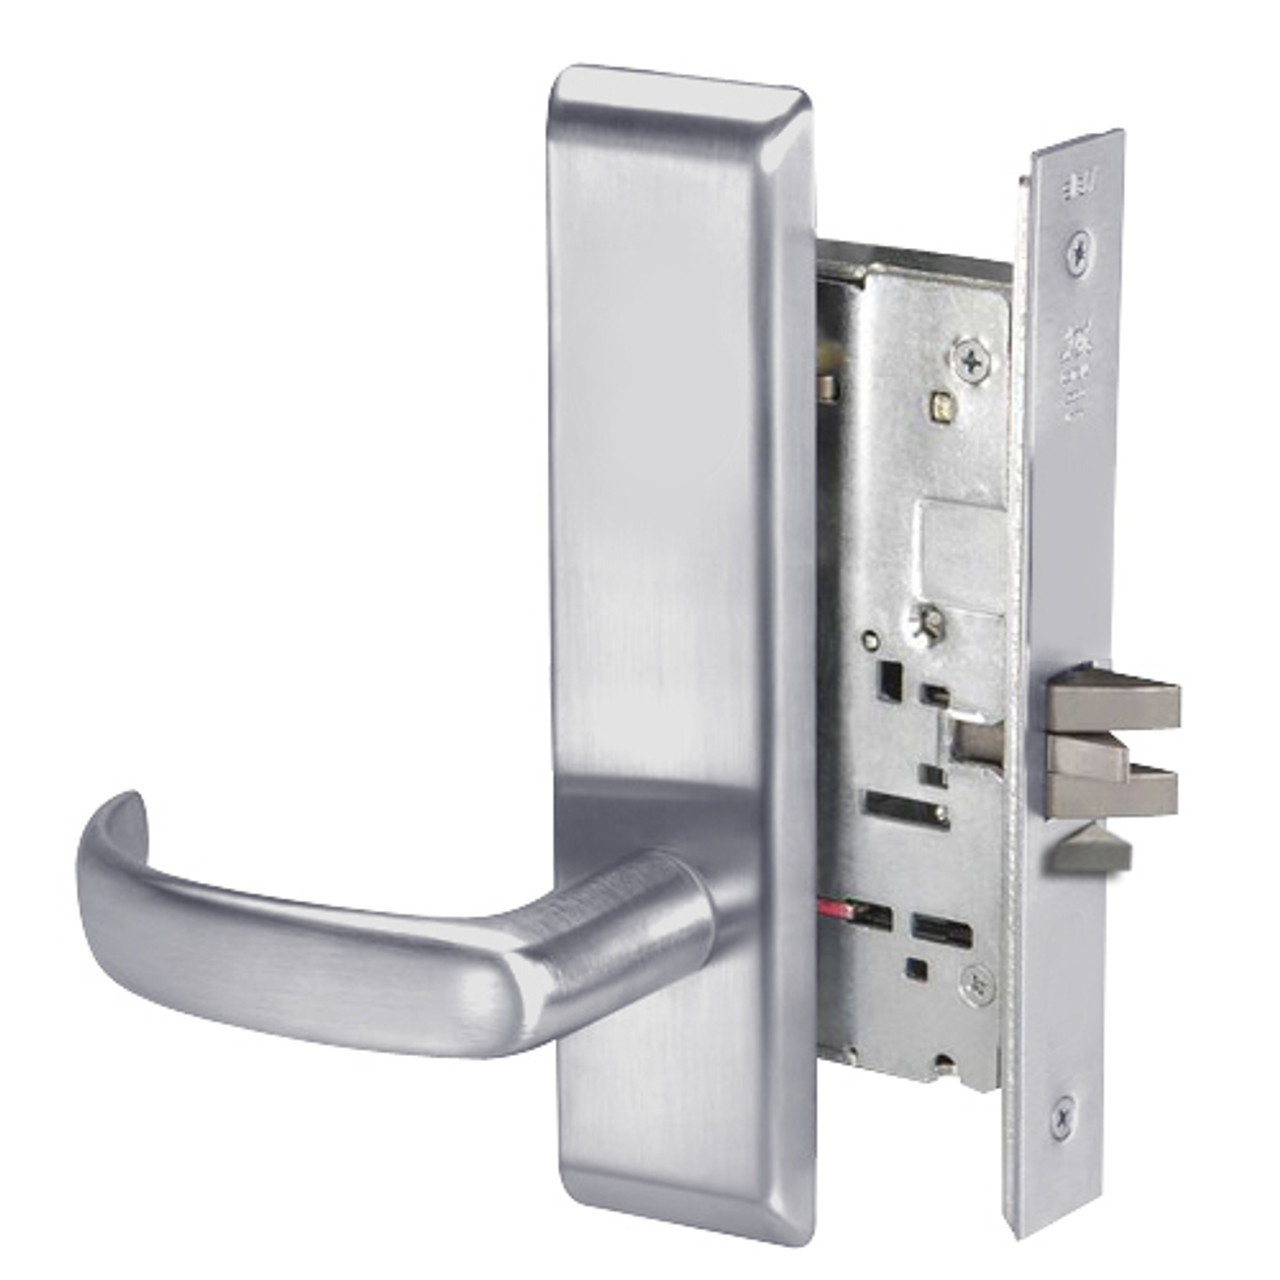 PBCN8833FL-626 Yale 8800FL Series Single Cylinder Mortise Exit Locks with Pacific Beach Lever in Satin Chrome